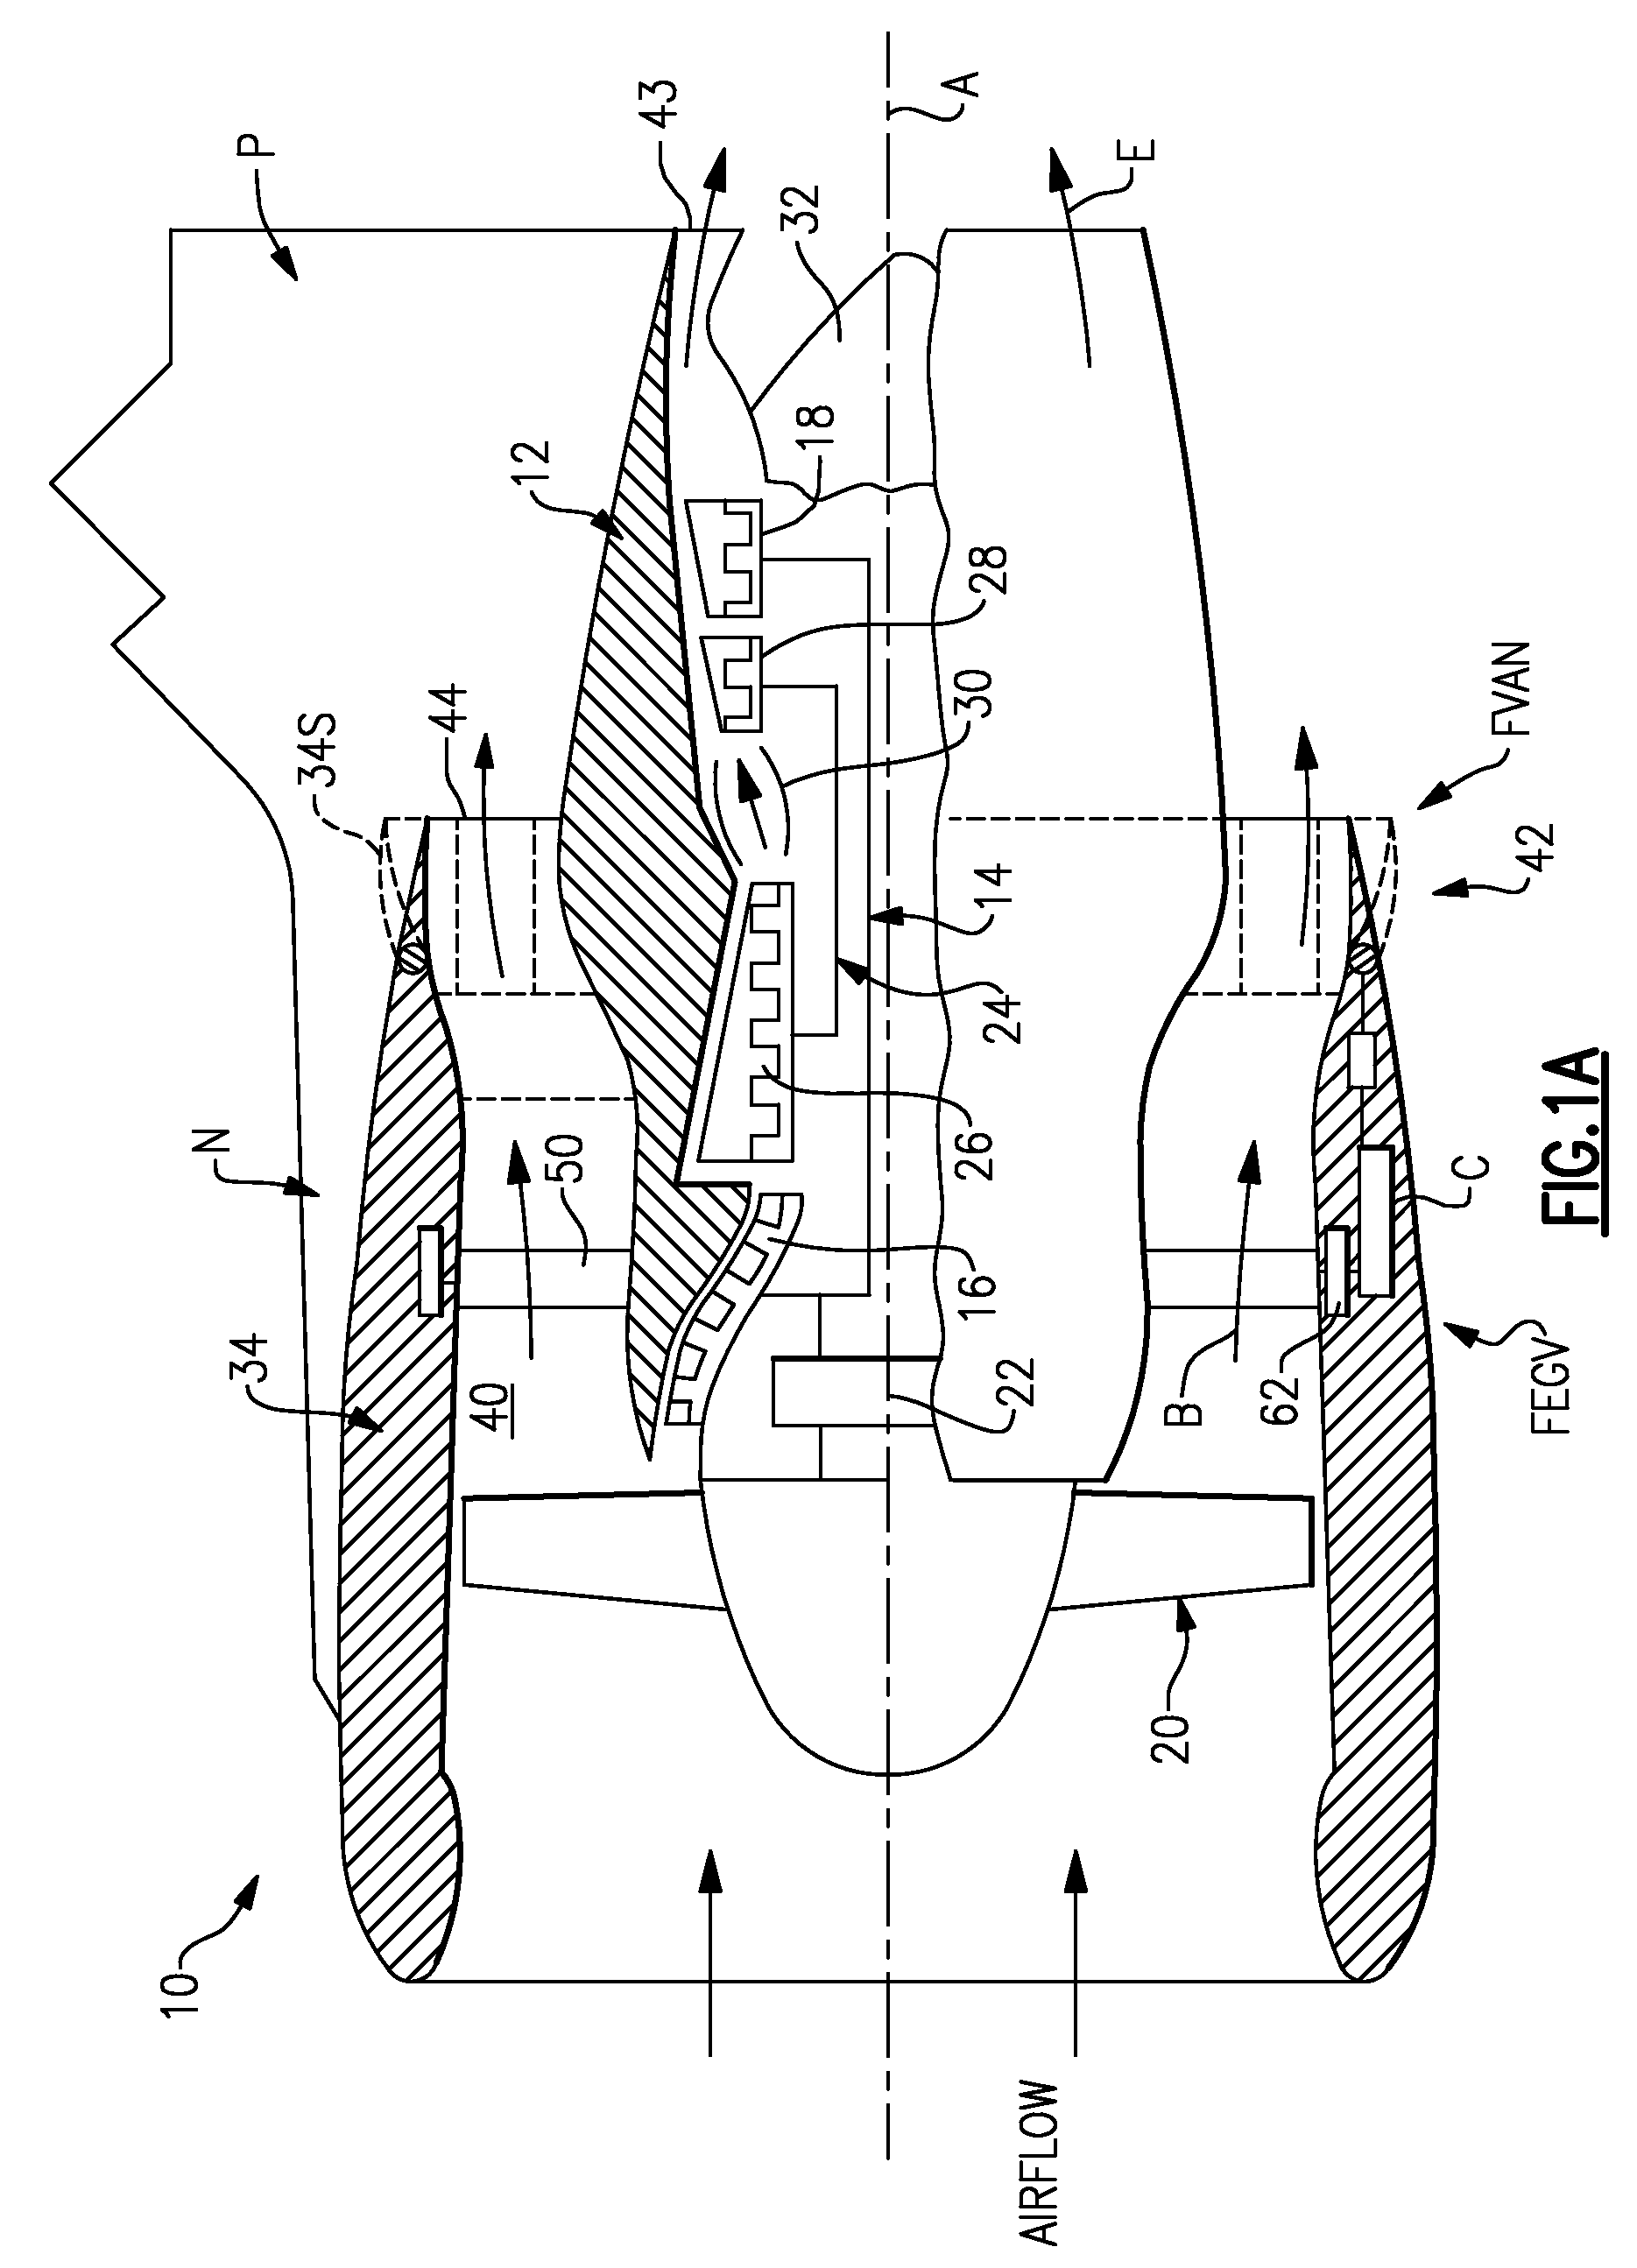 Gas turbine engine with variable geometry fan exit guide vane system